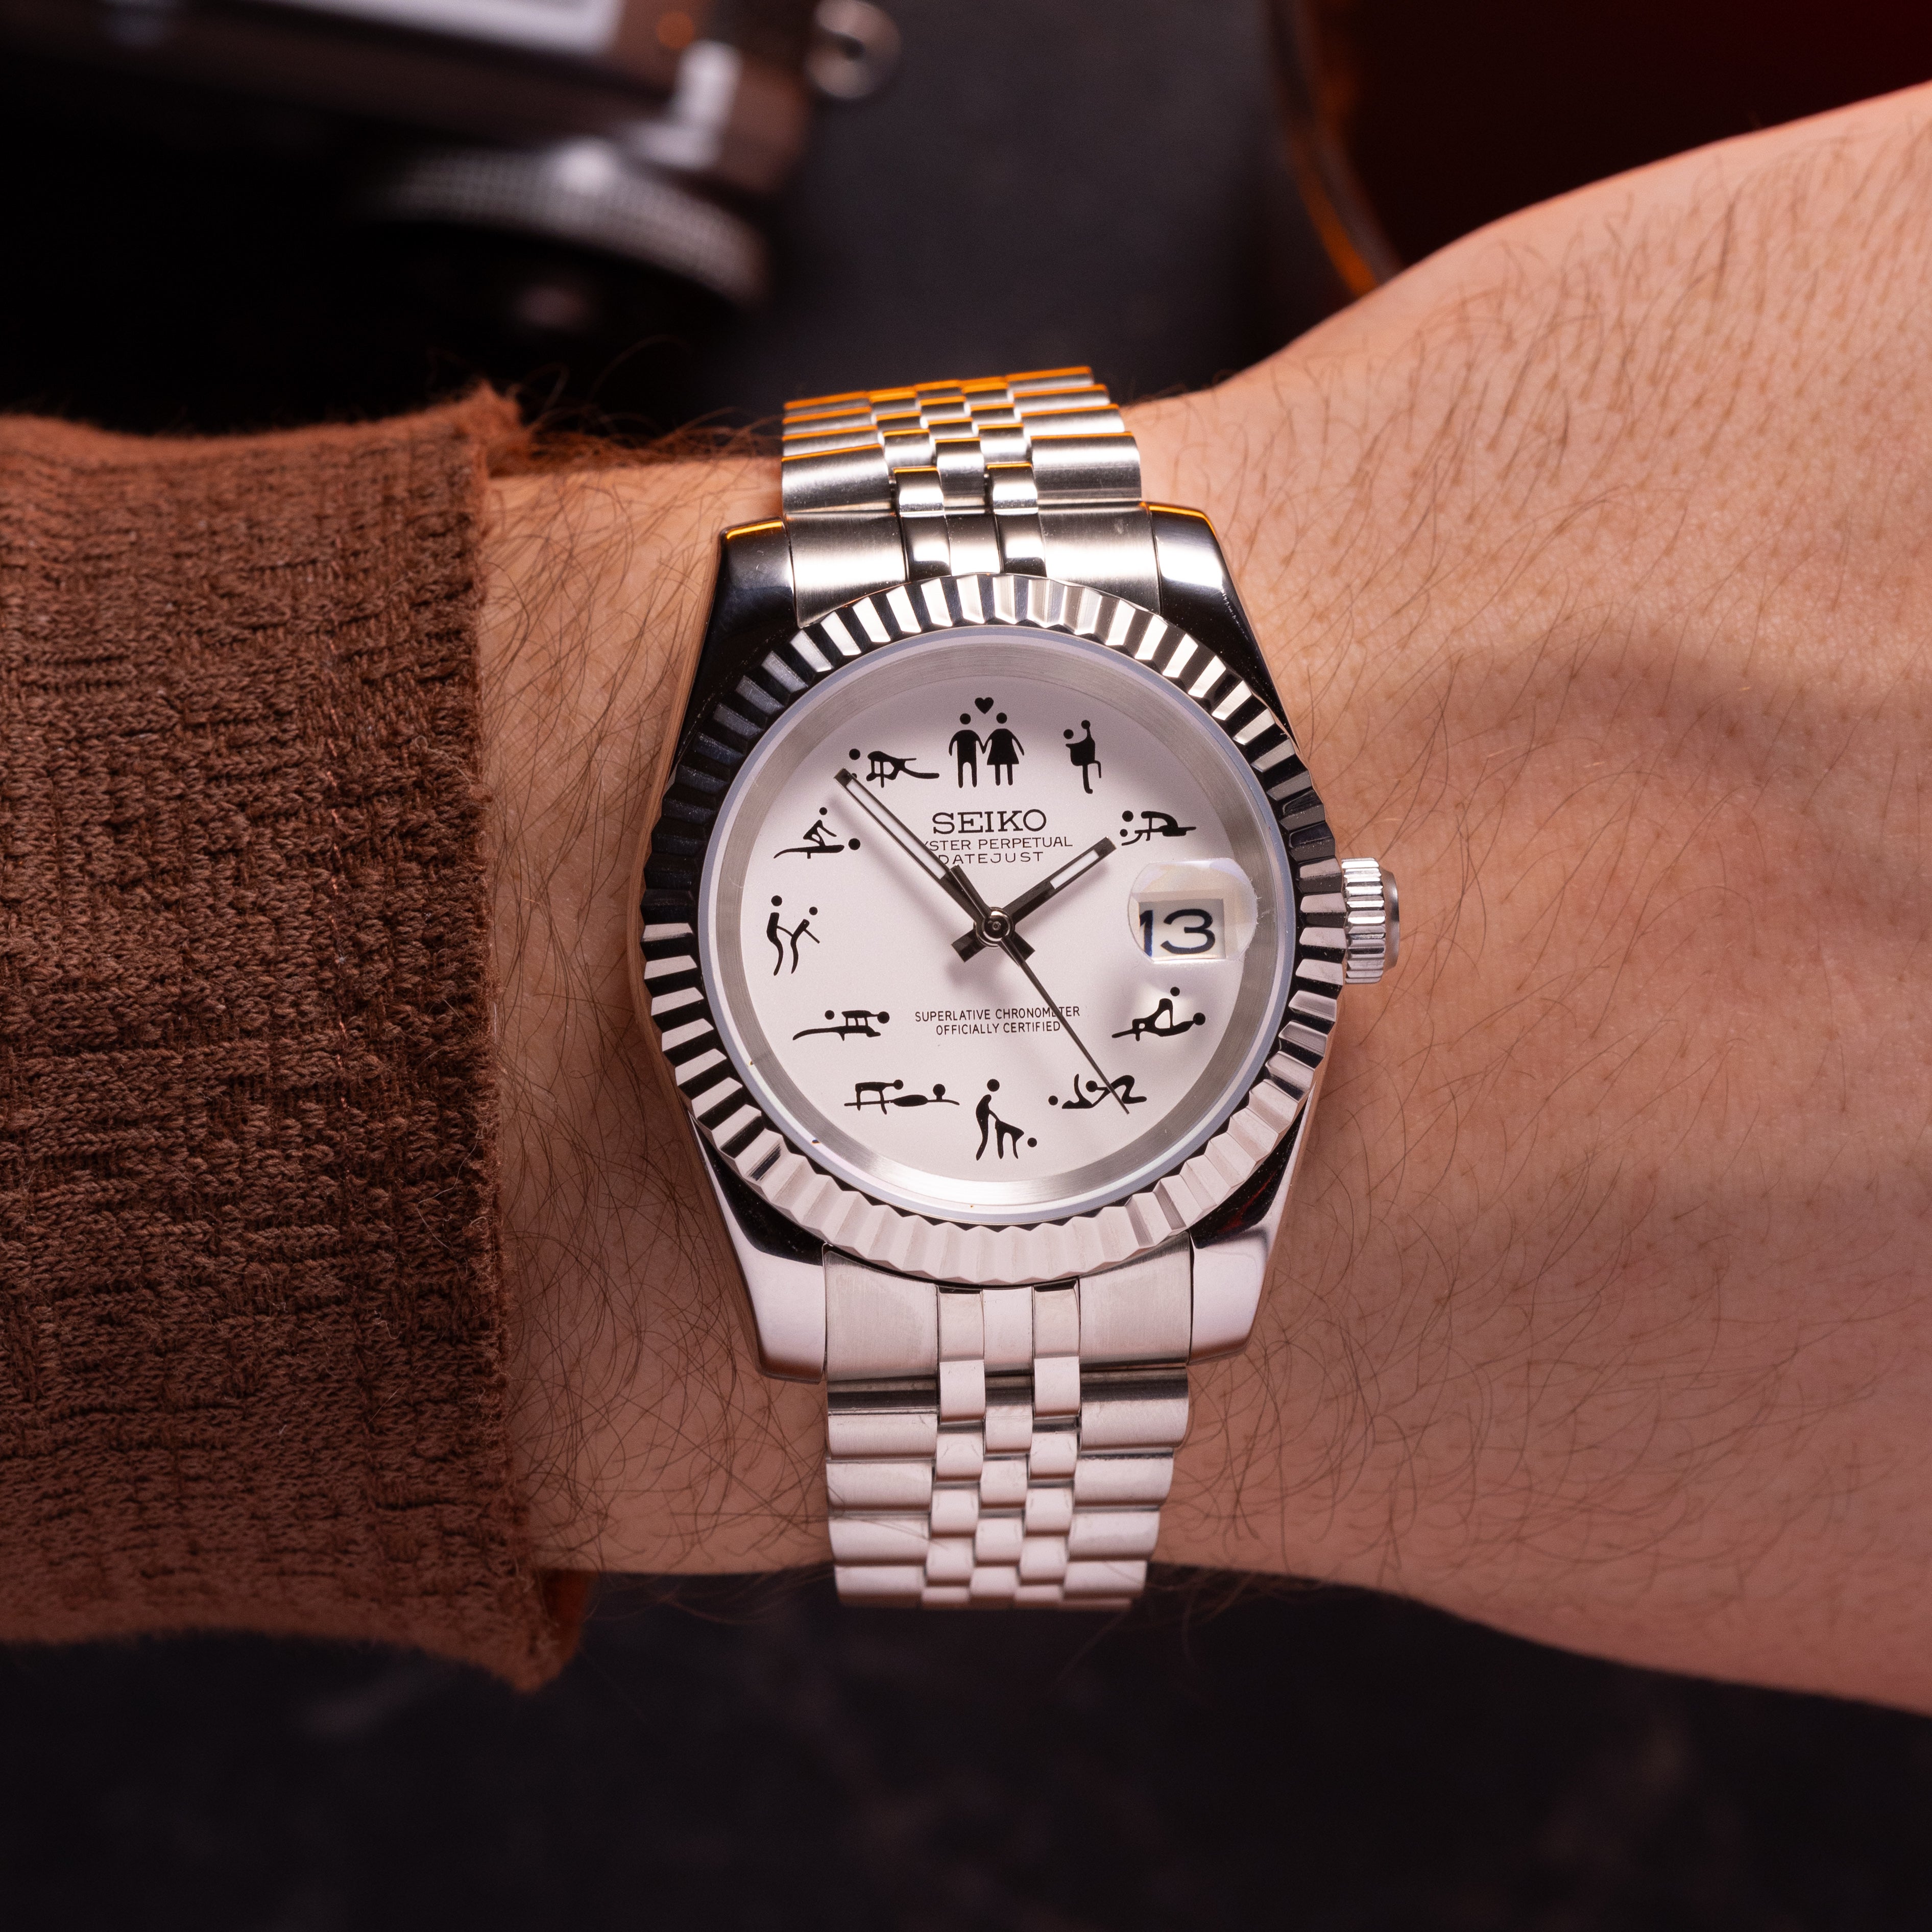 Seiko Datejust Love Poses Mod Watch with Skeleton Back